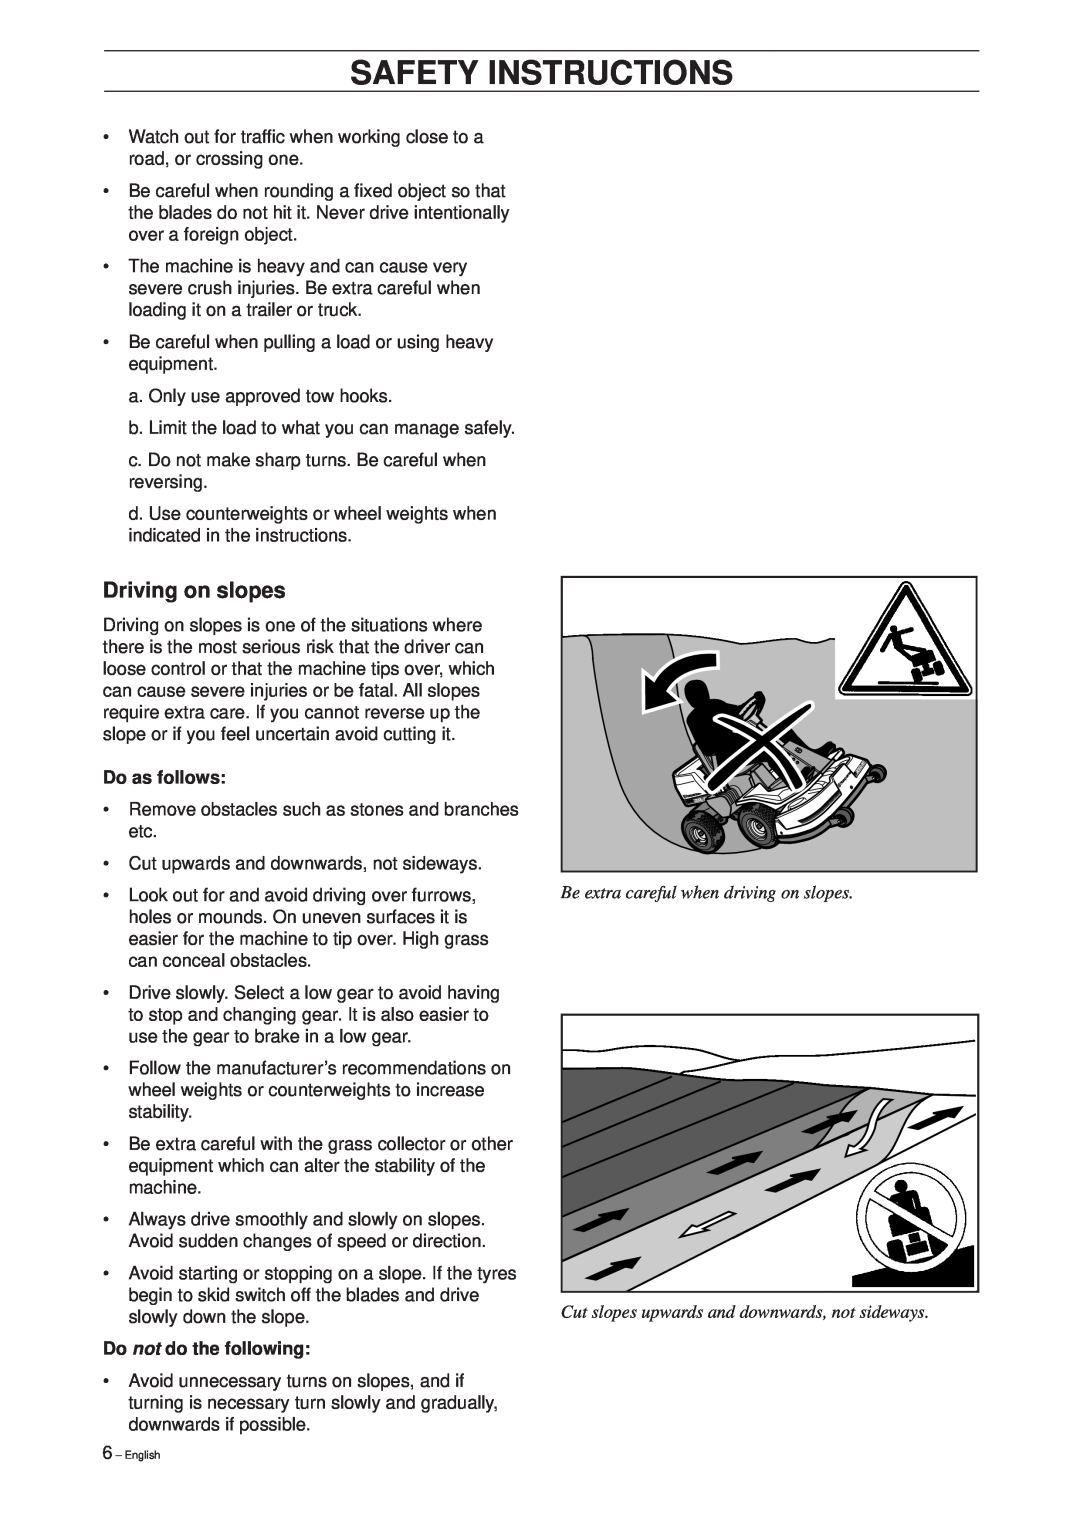 Husqvarna 18 ProFlex, 20 ProFlex manual Driving on slopes, Be extra careful when driving on slopes, Safety Instructions 